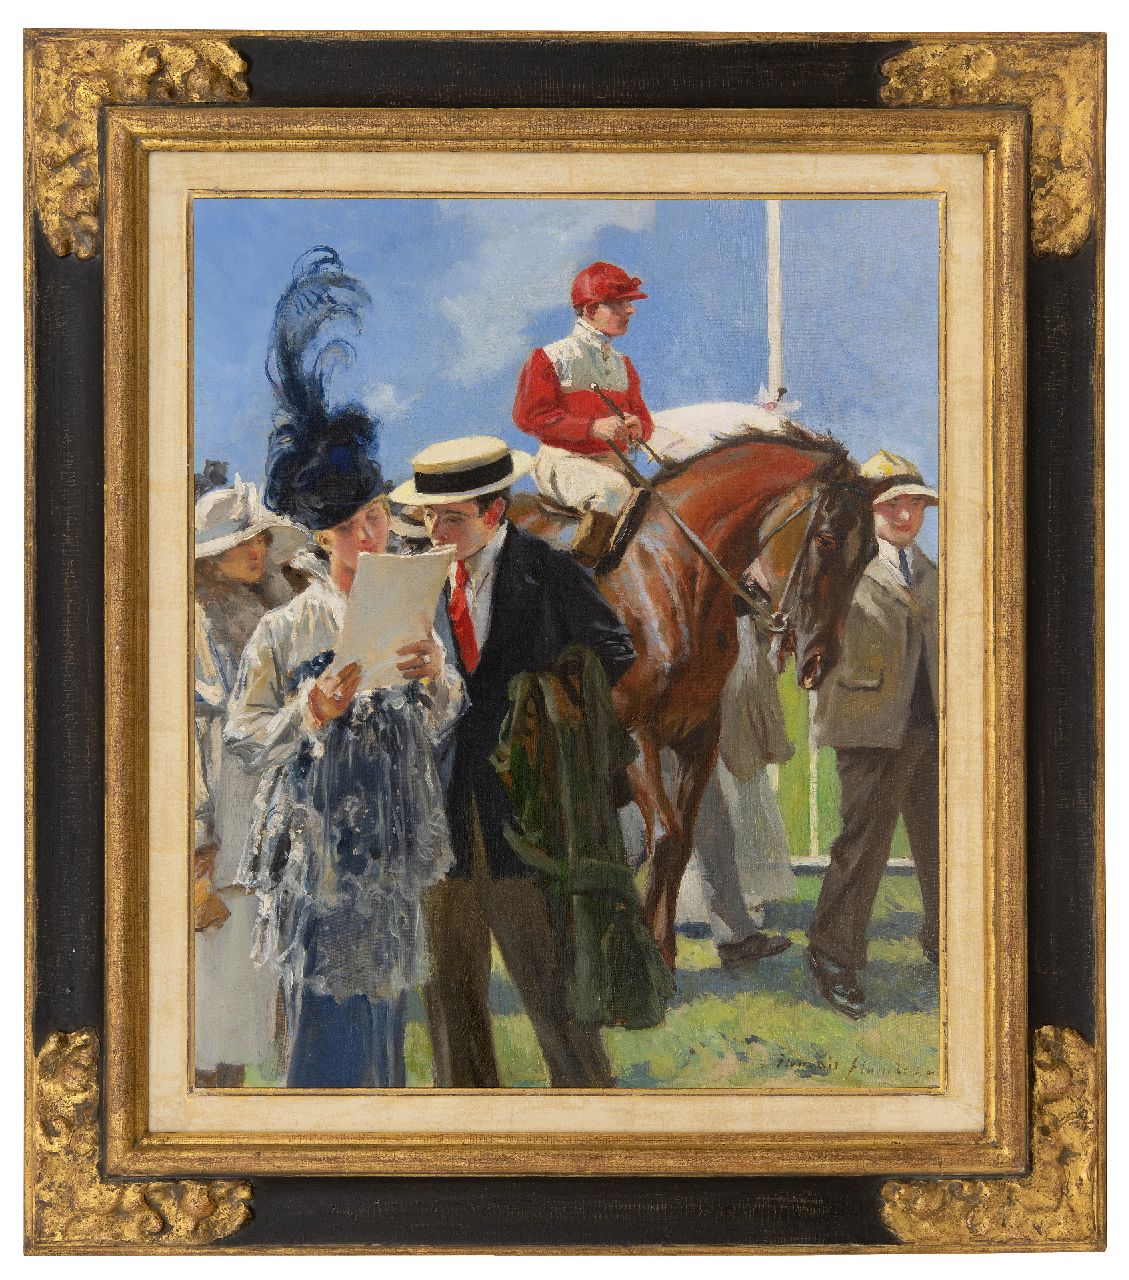 Flameng F.  | François Flameng | Paintings offered for sale | At the races, oil on canvas 55.0 x 46.2 cm, signed l.r.